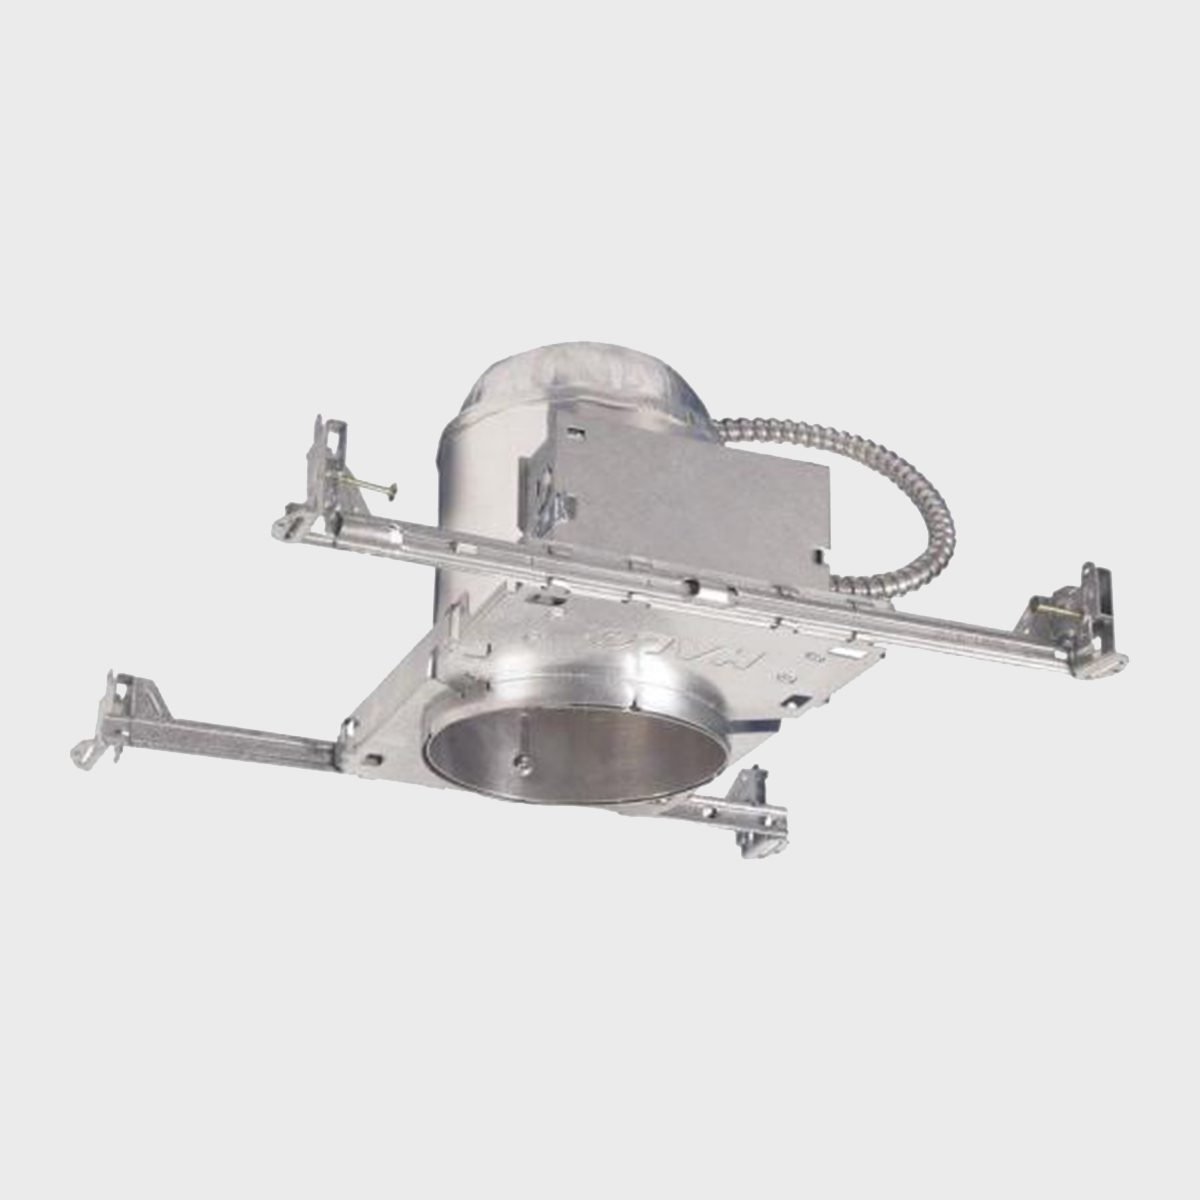 New Construction IC Rated Aluminum Recessed Lighting Housing For Ceiling Via Homedepot.com Ecomm ?w=1200